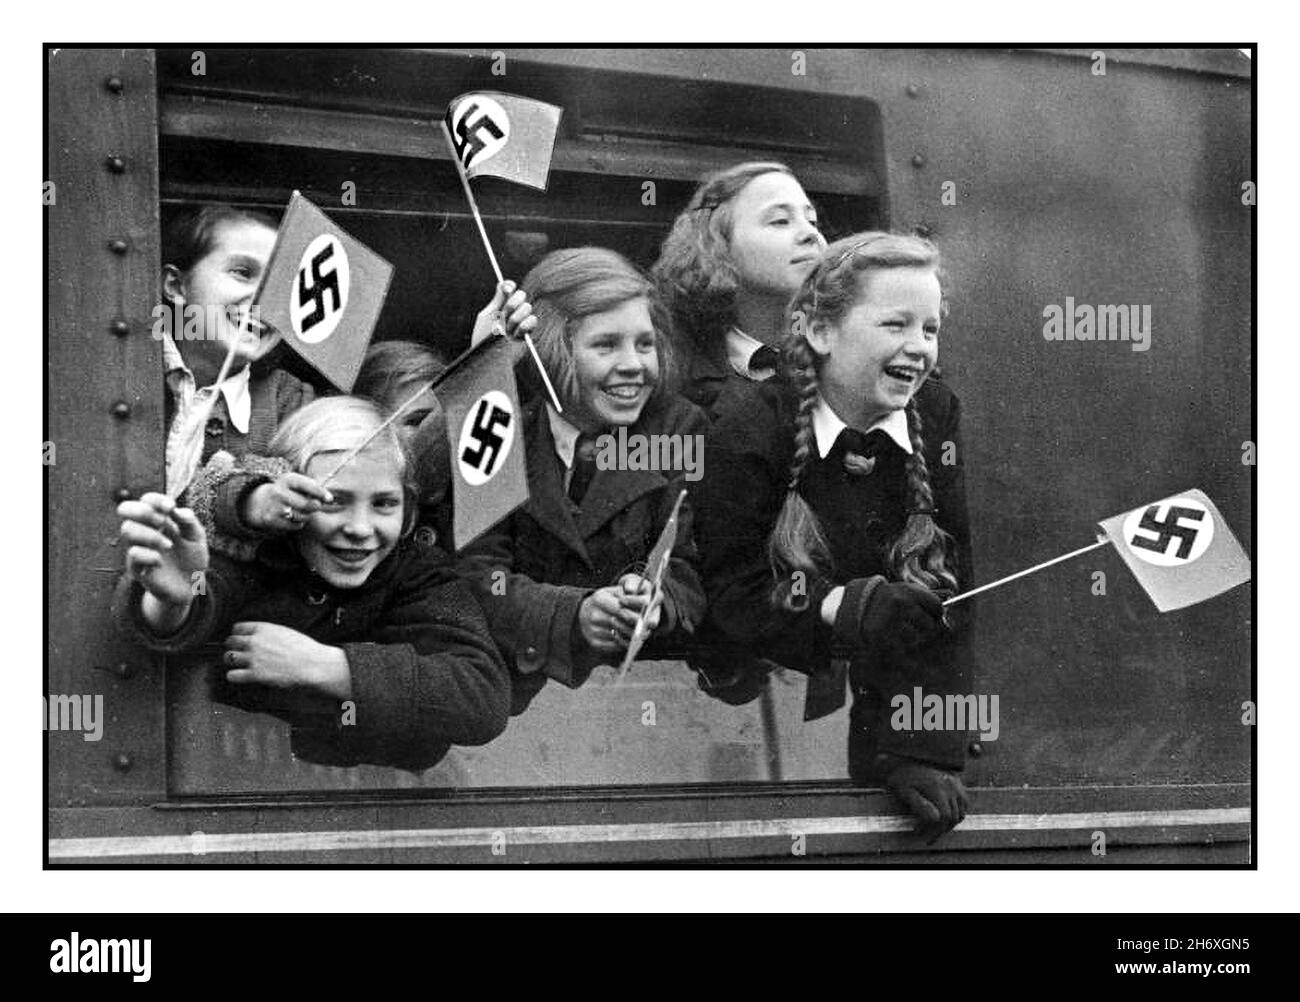 WW2 NAZI GERMANY CHILDREN EVACUATION KINDERTRANSPORTE KINDERLANDVERSCHICKUNG WW2 1940s Evacuations of children in Germany during World War II German children leave Berlin in a special train 'Kindertransporte' waving Nazi swastika flags Daily new child transports from all areas of the population in the Reich capital as part of the overland deportation to other districts of the Nazi German Reich, to protect them from allied bombing GERMAN CHILDREN WW2  Kinder Transport Vintage WW2 Nazi Germany ‘ Kinderlandverschickung’ Propaganda Poster from 1942-1943. Allied bombing of German cities Stock Photo